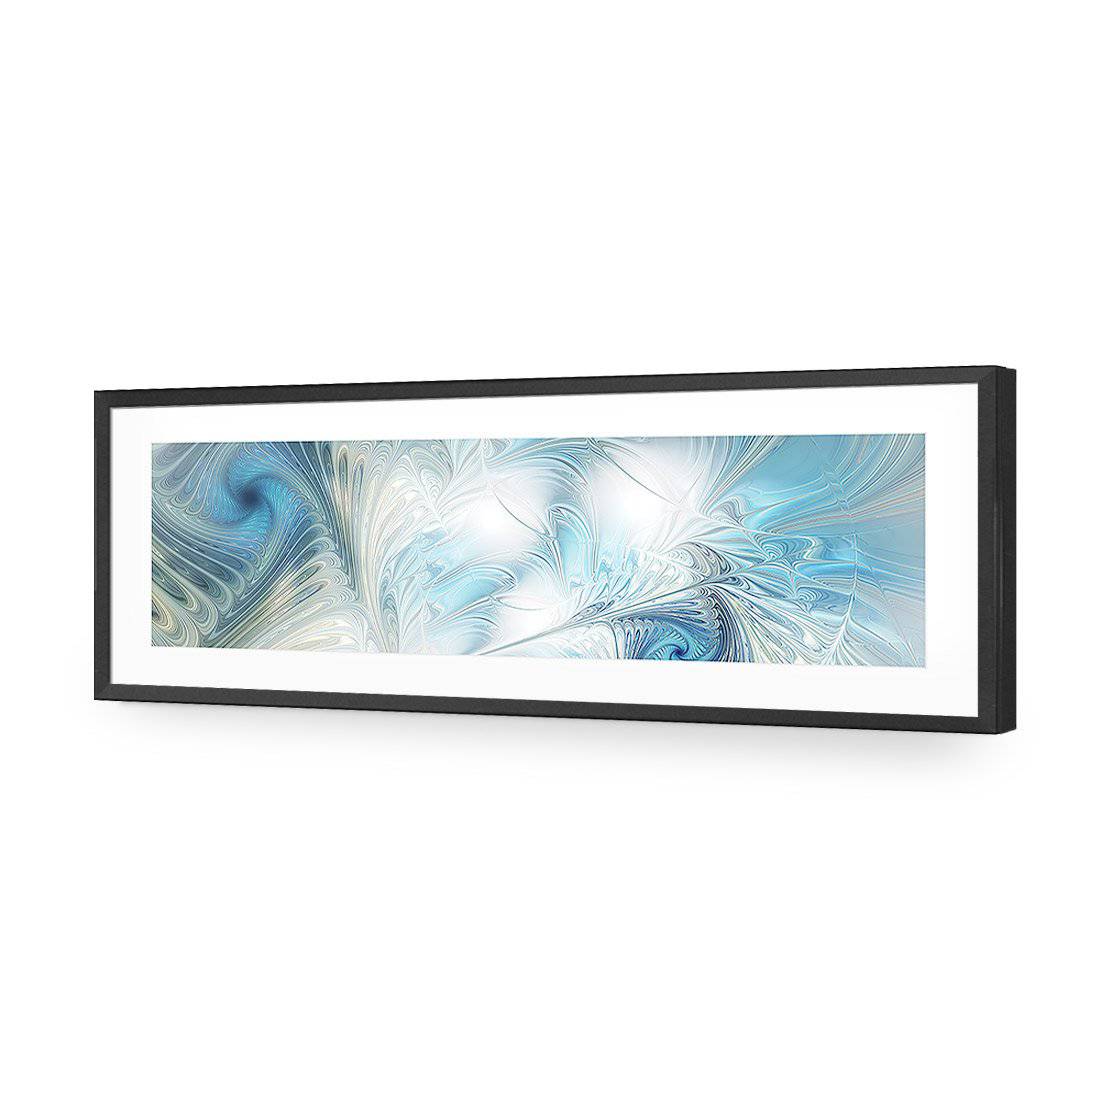 Travesty, Long-Acrylic-Wall Art Design-With Border-Acrylic - Black Frame-60x20cm-Wall Art Designs